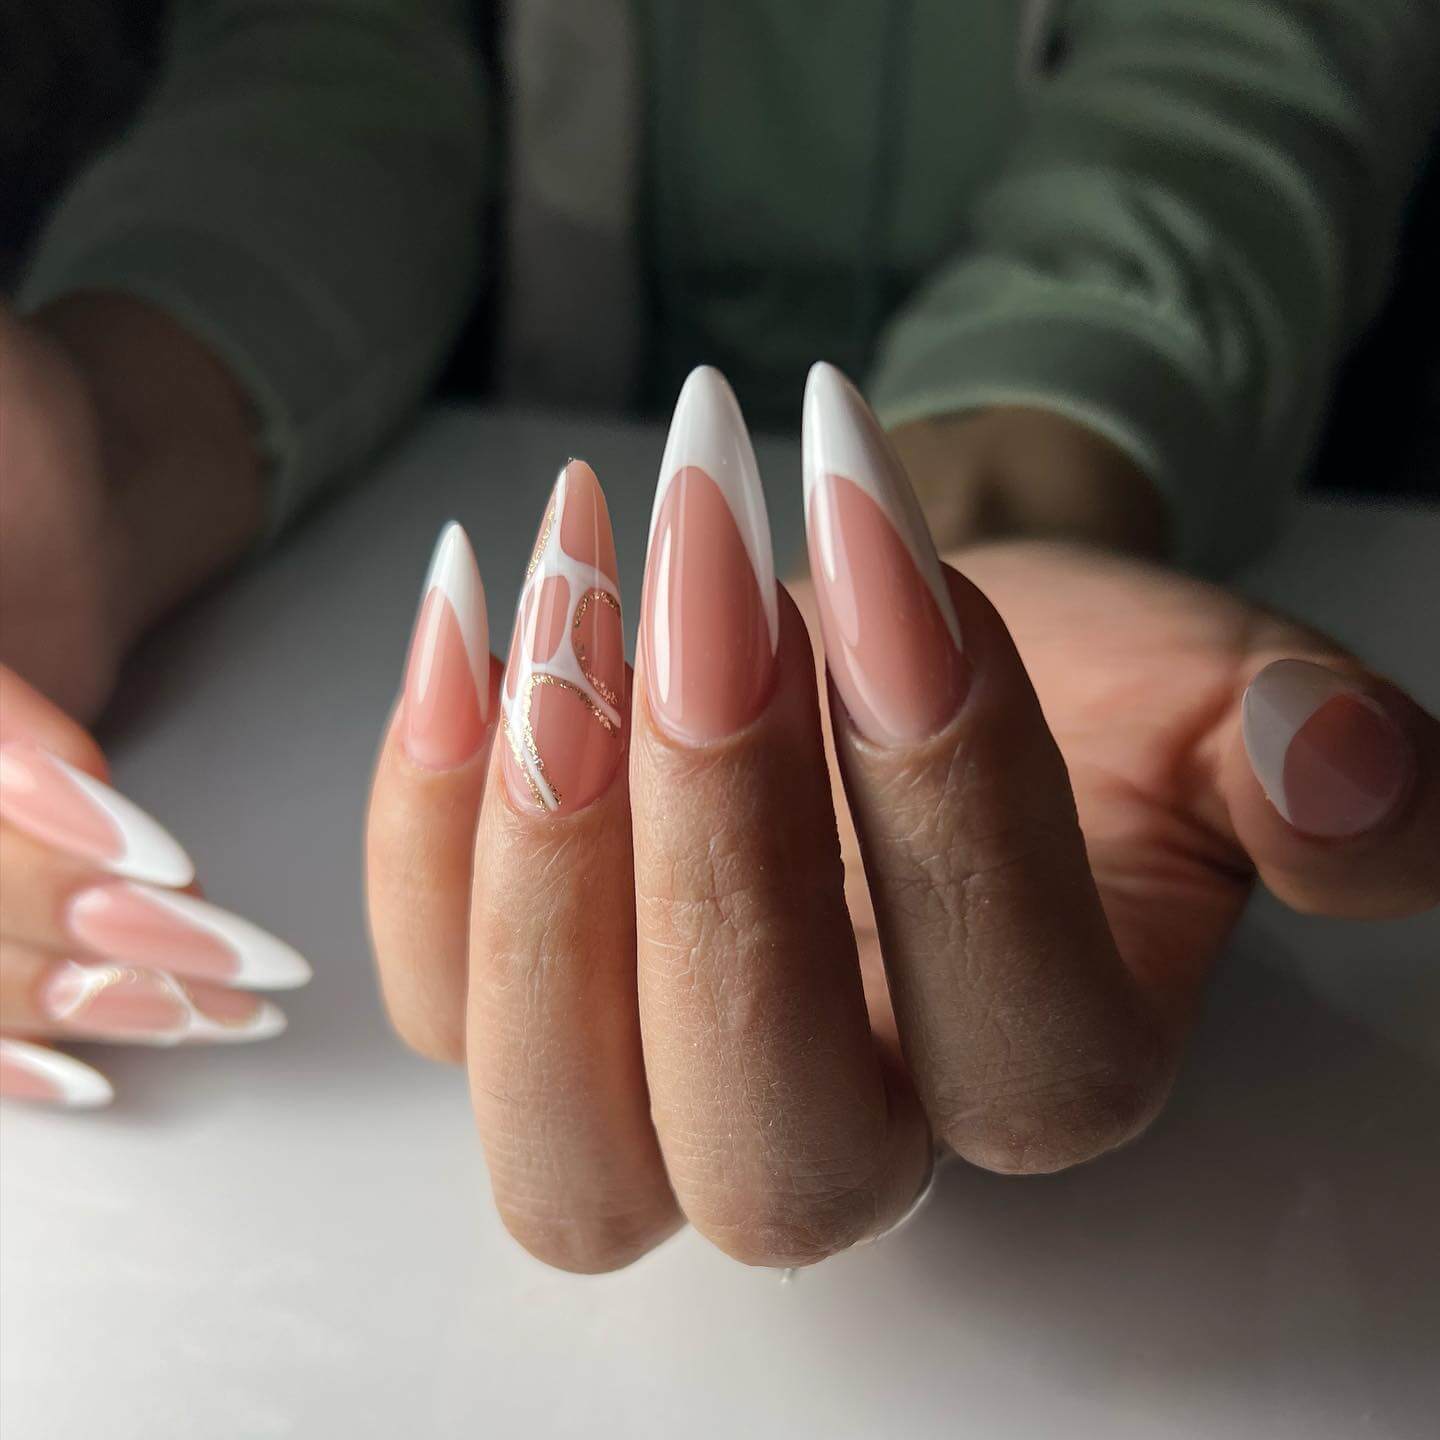 35 Coffin Acrylic Nails Ideas To Get In 2023